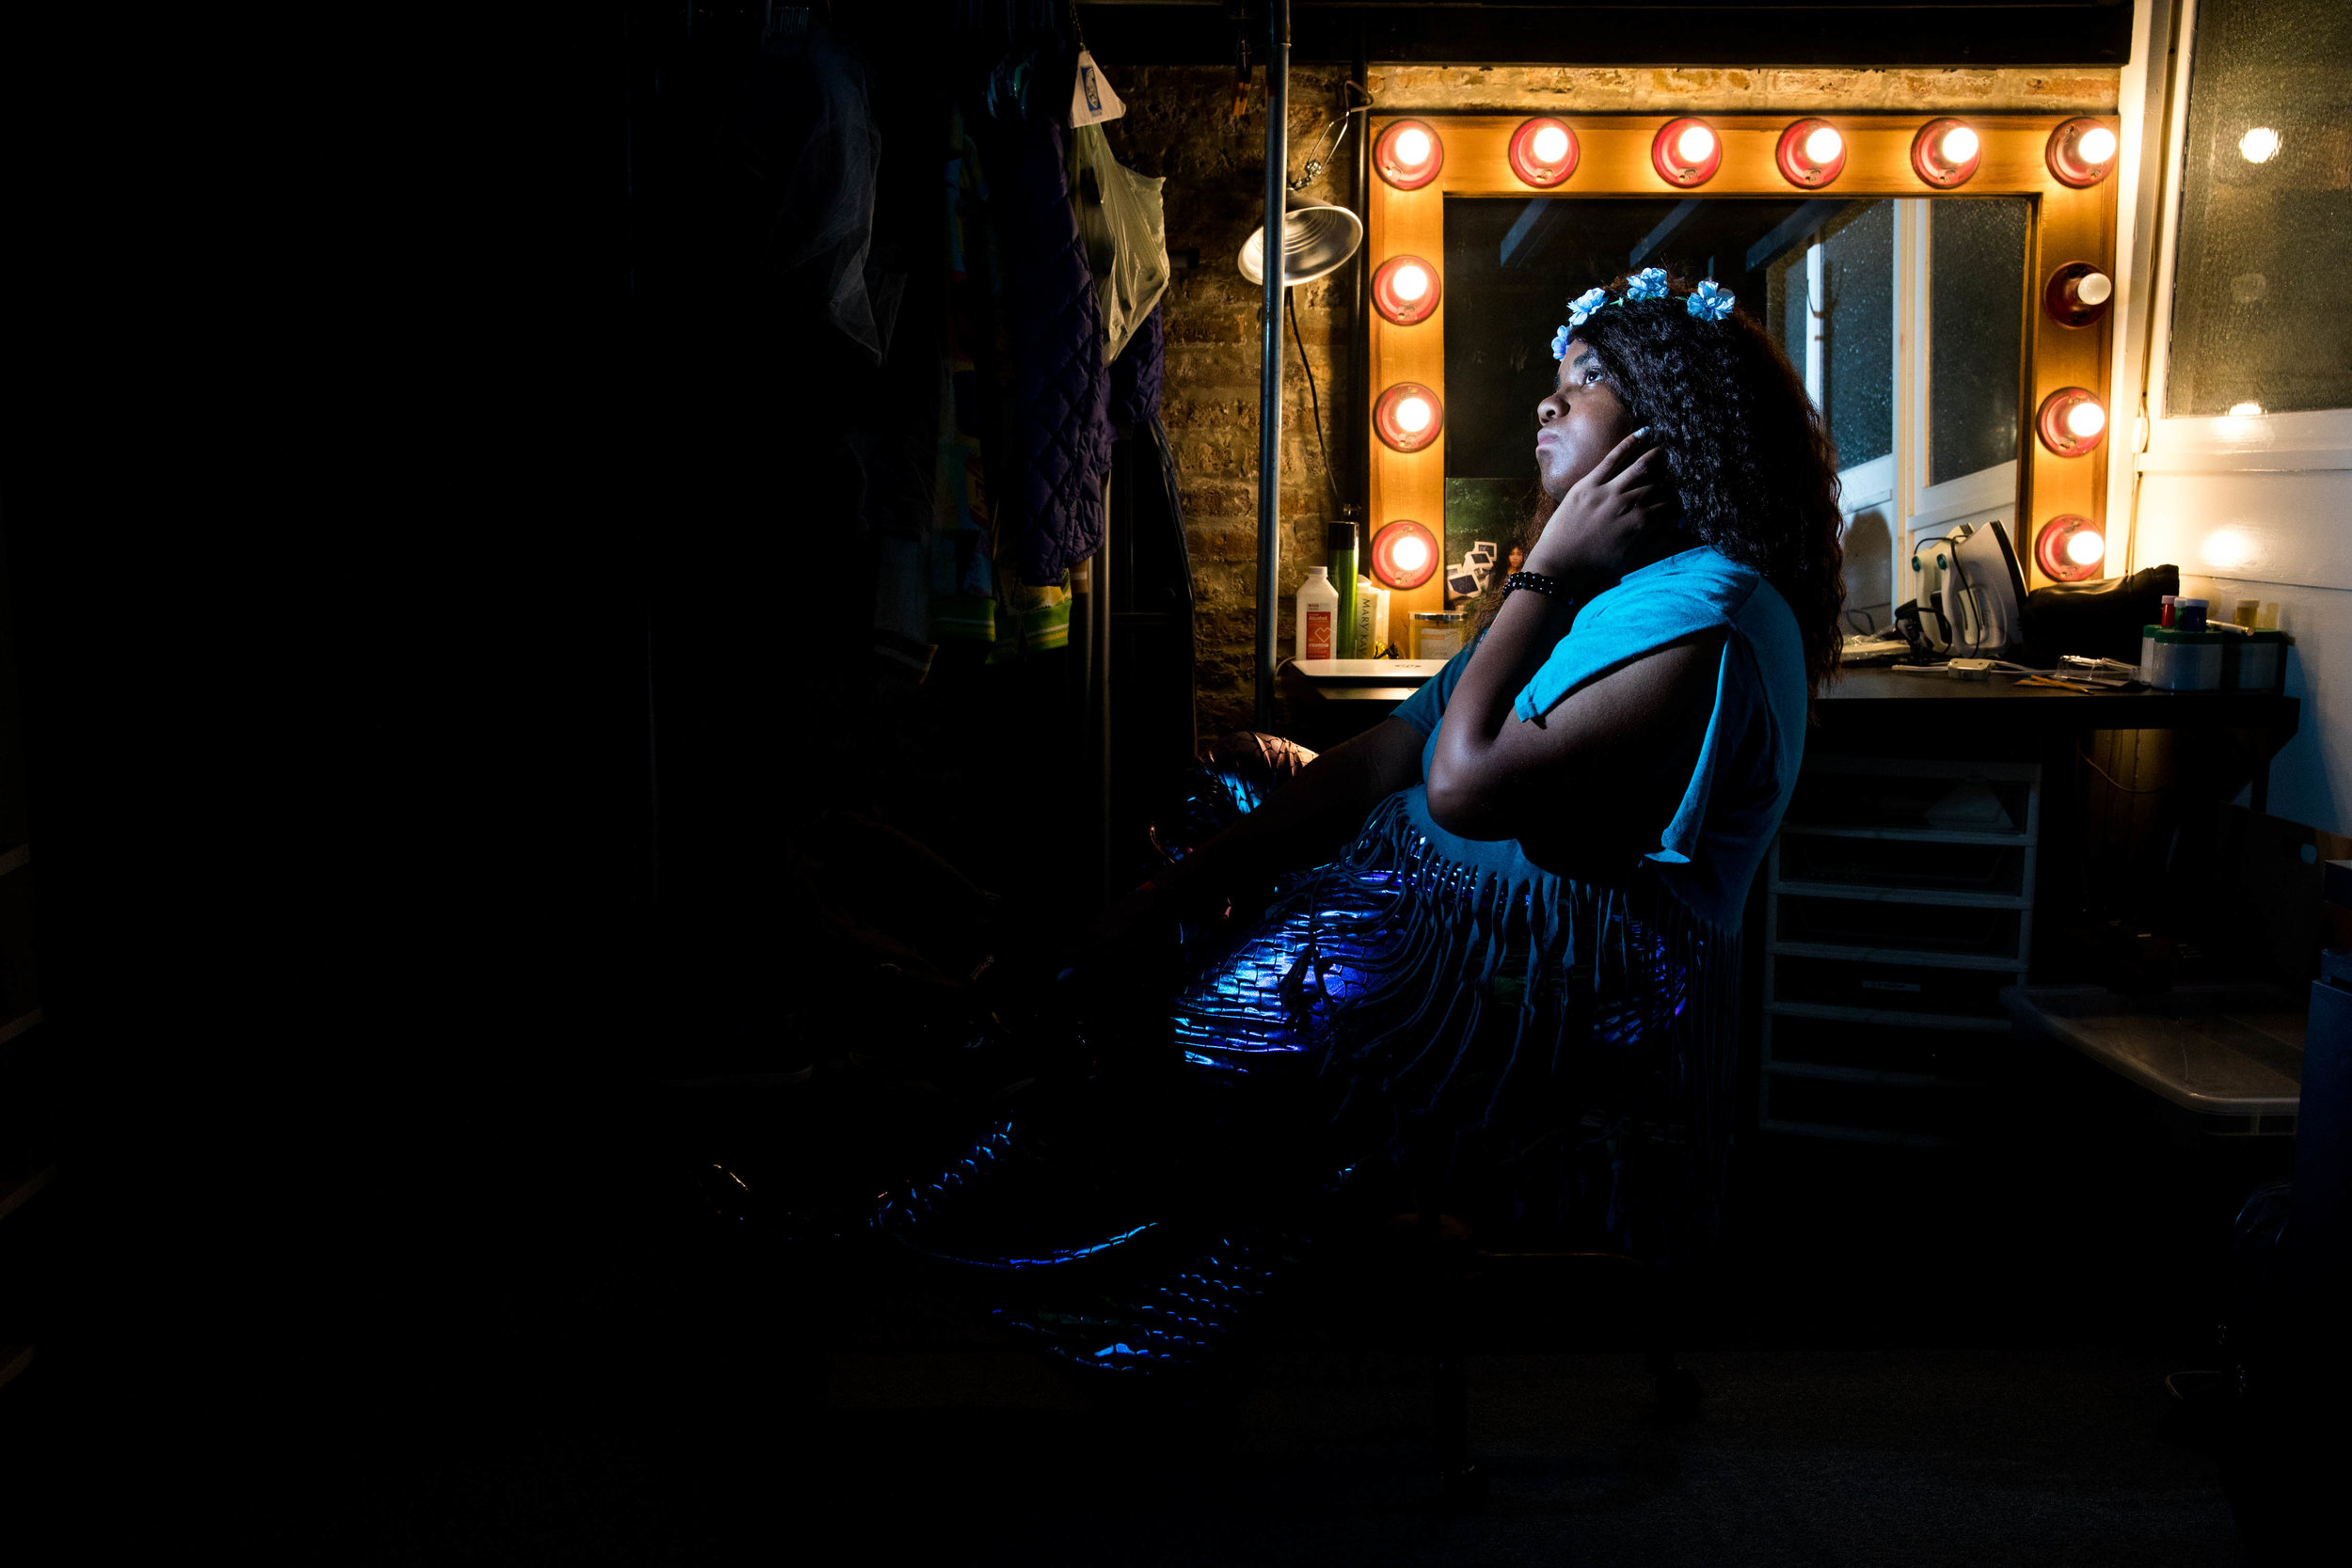  Jaden Woods, 15, poses for a portrait in an outfit he designed and made for his drag persona, Divinity Amazara, to attend his first Pride Parade, in Chicago. The Louisiana native is staying with his Aunt and her wife for the summer while he attends 